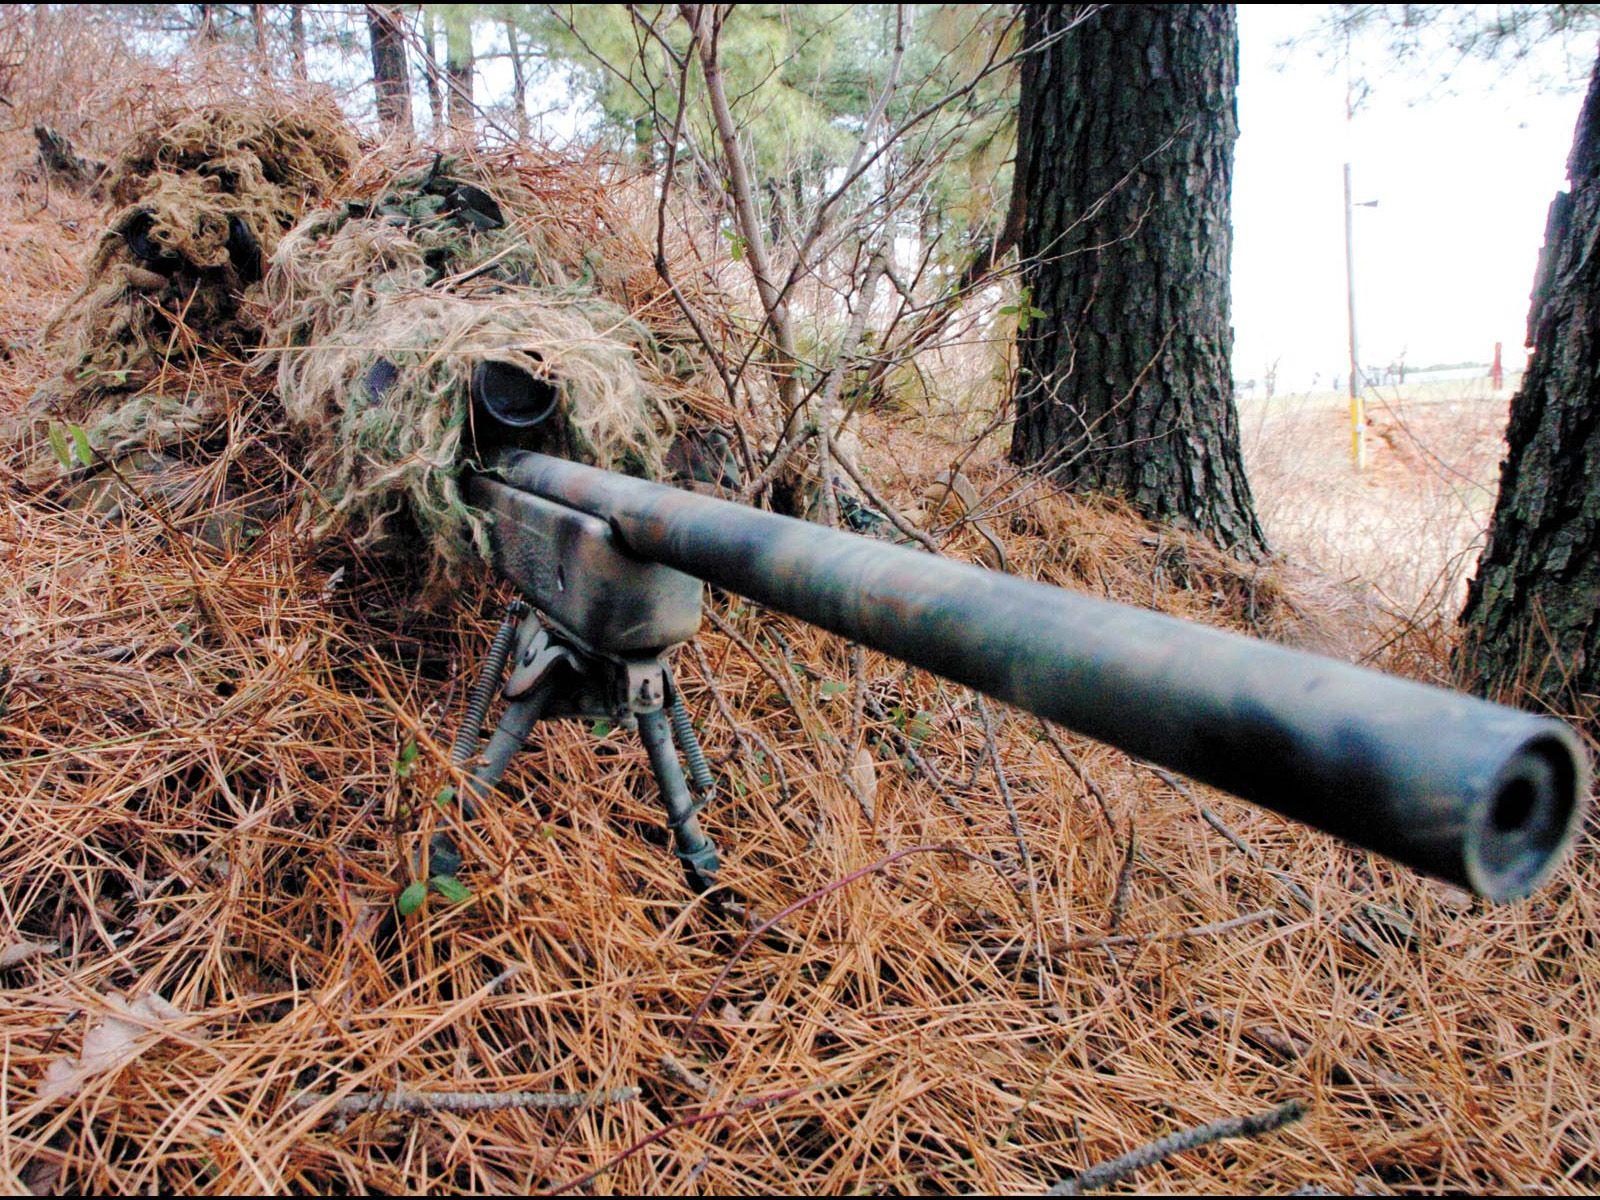 M40 guides snipers to target